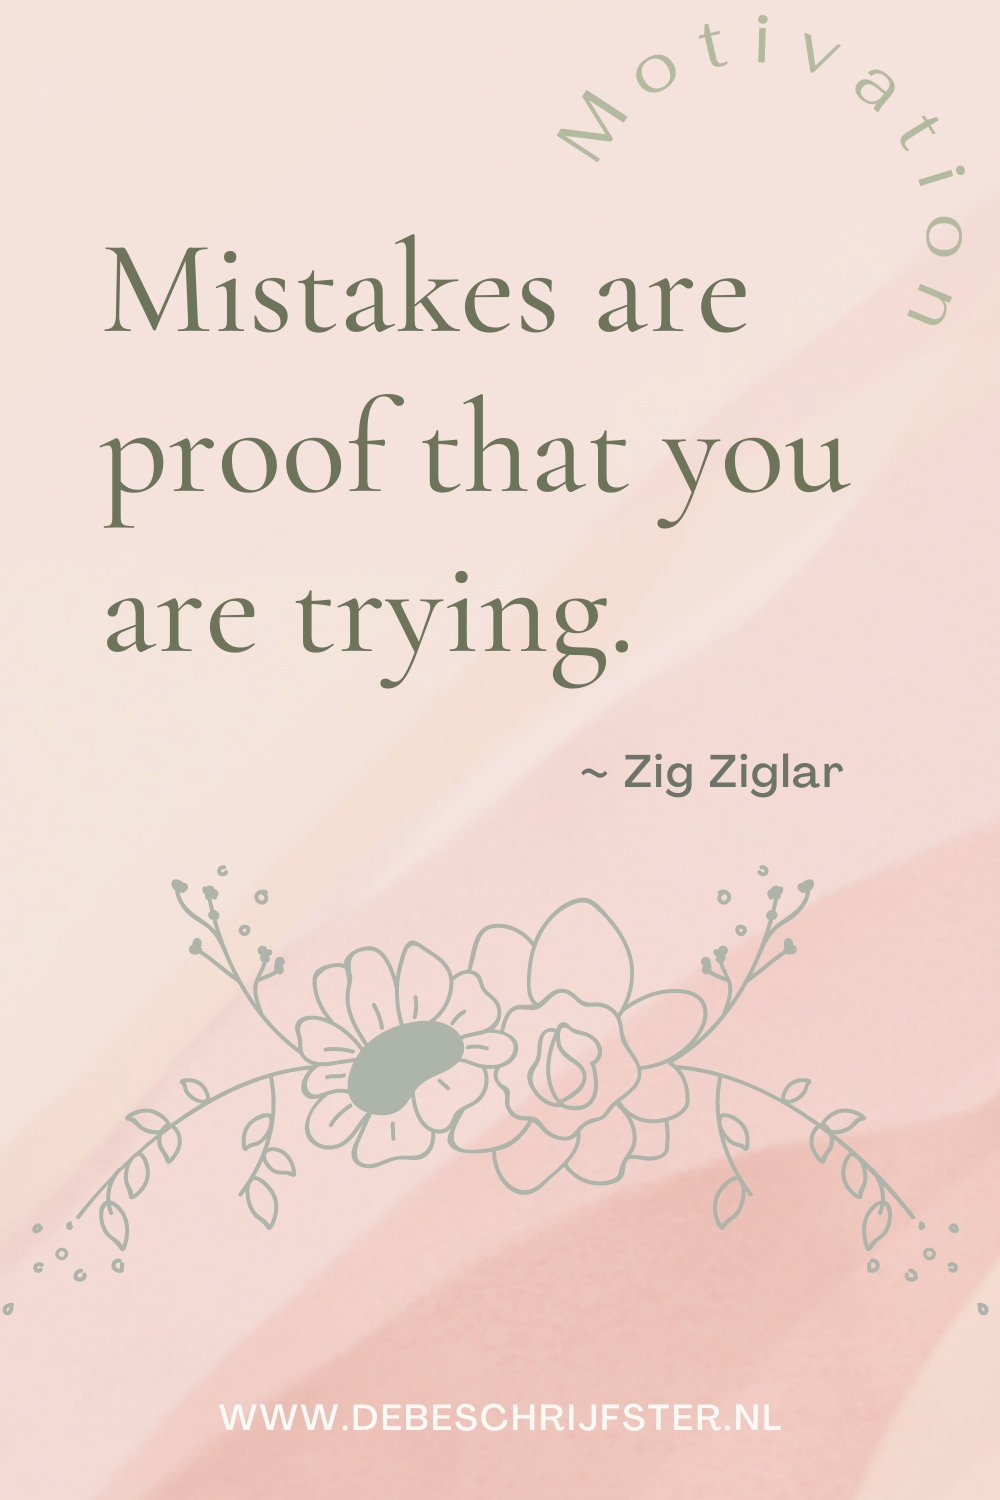 Mistakes are proof that you're trying. Zig Ziglar